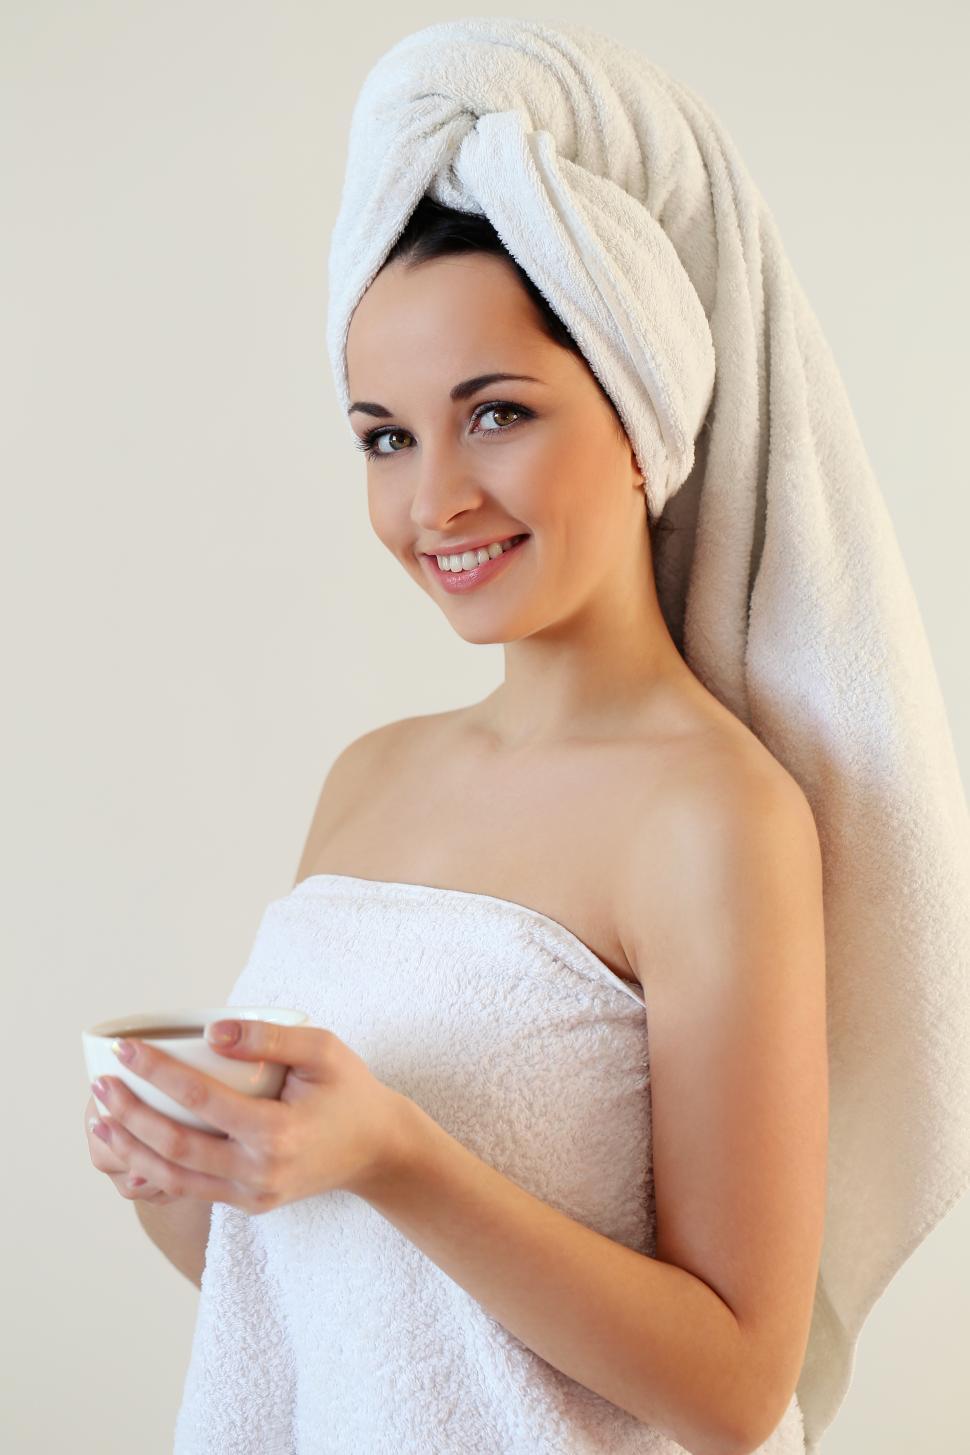 Woman in towel with a cup of coffee